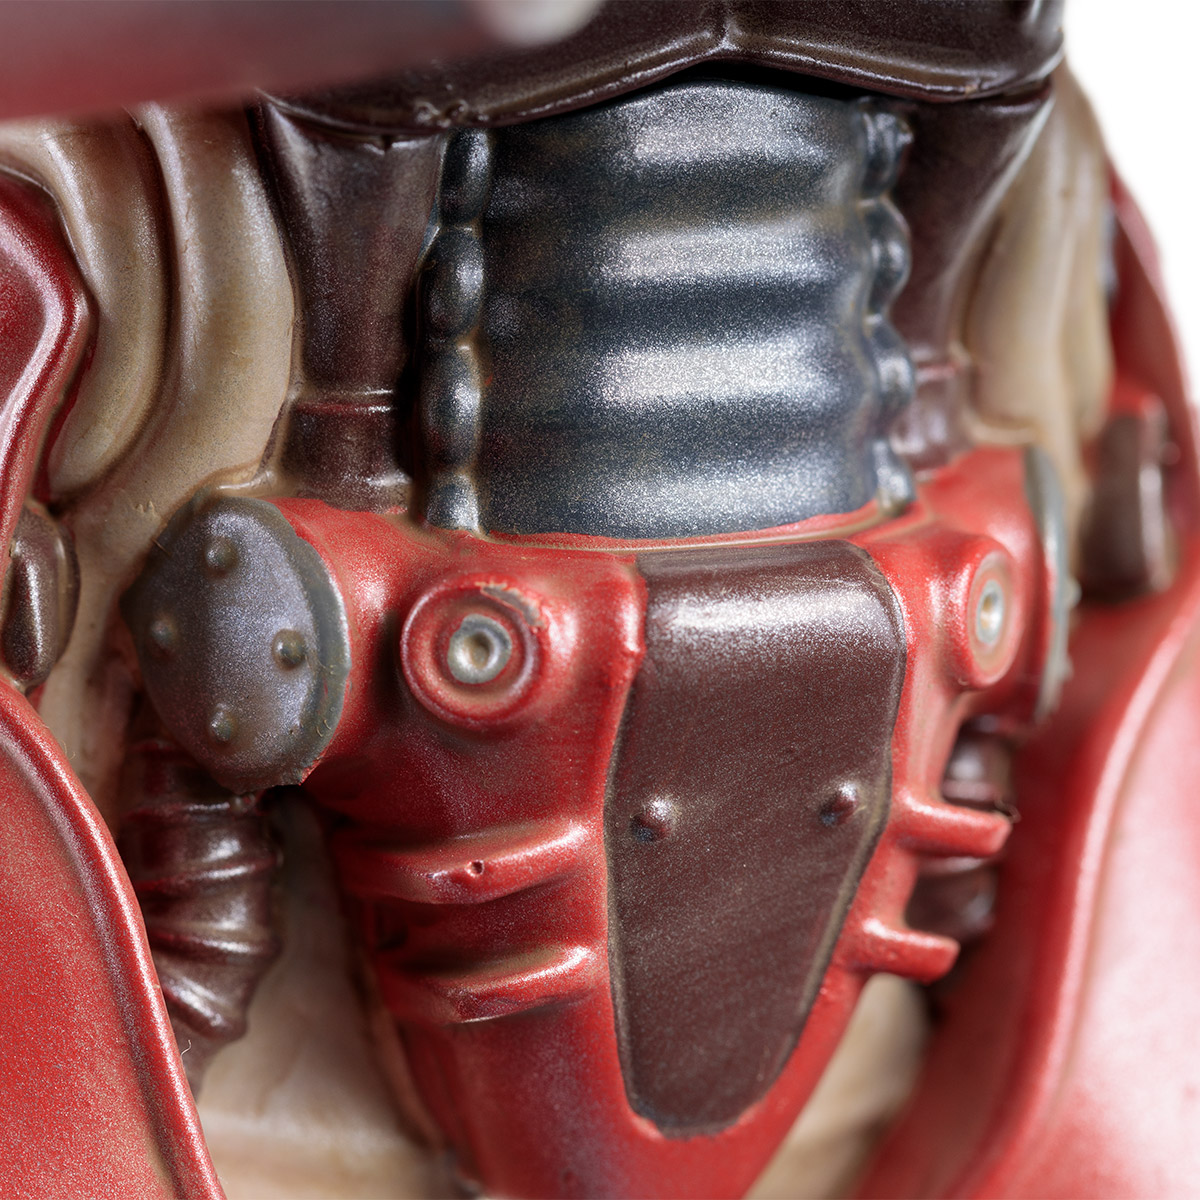 Fallout Power Armor Statue "Hot Rod Flames" Image 5